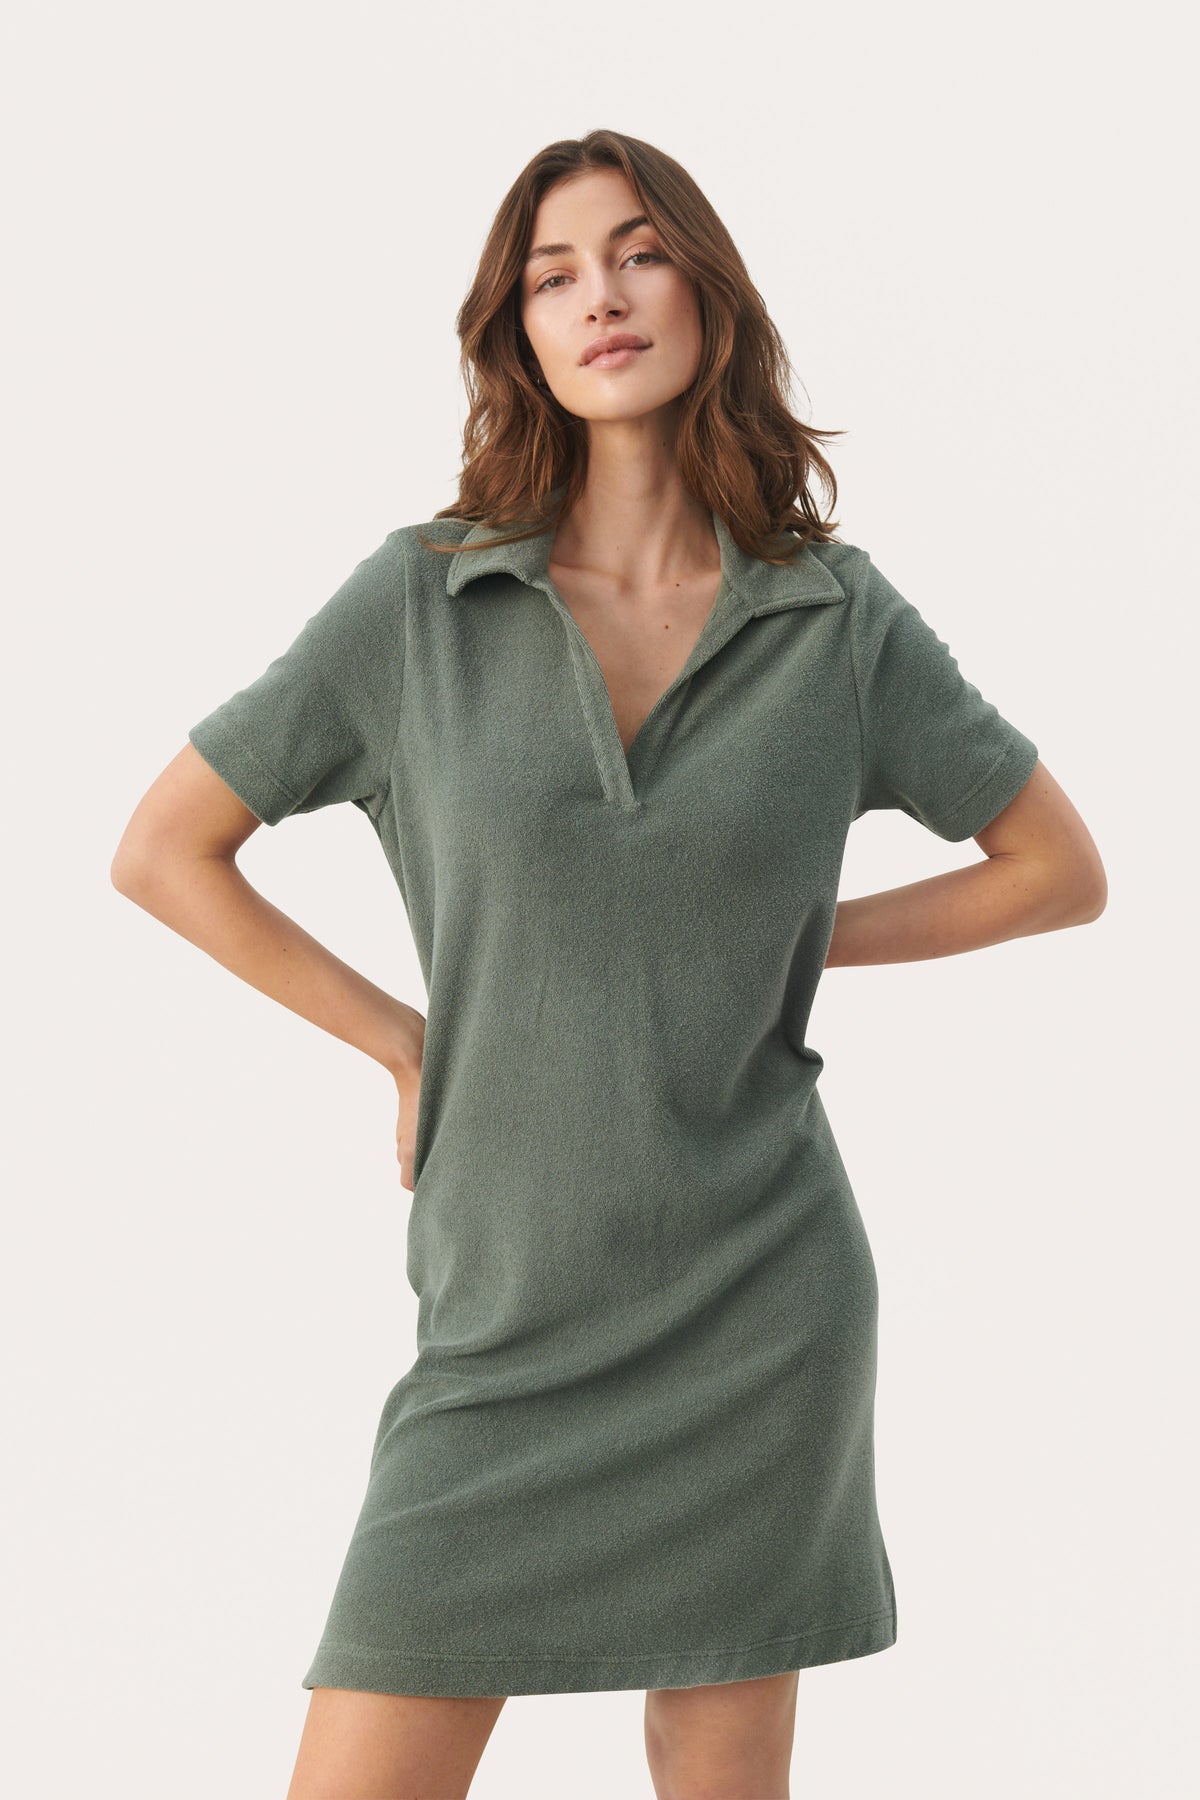 30308658 Agave Green Part Two Giavanna Dress